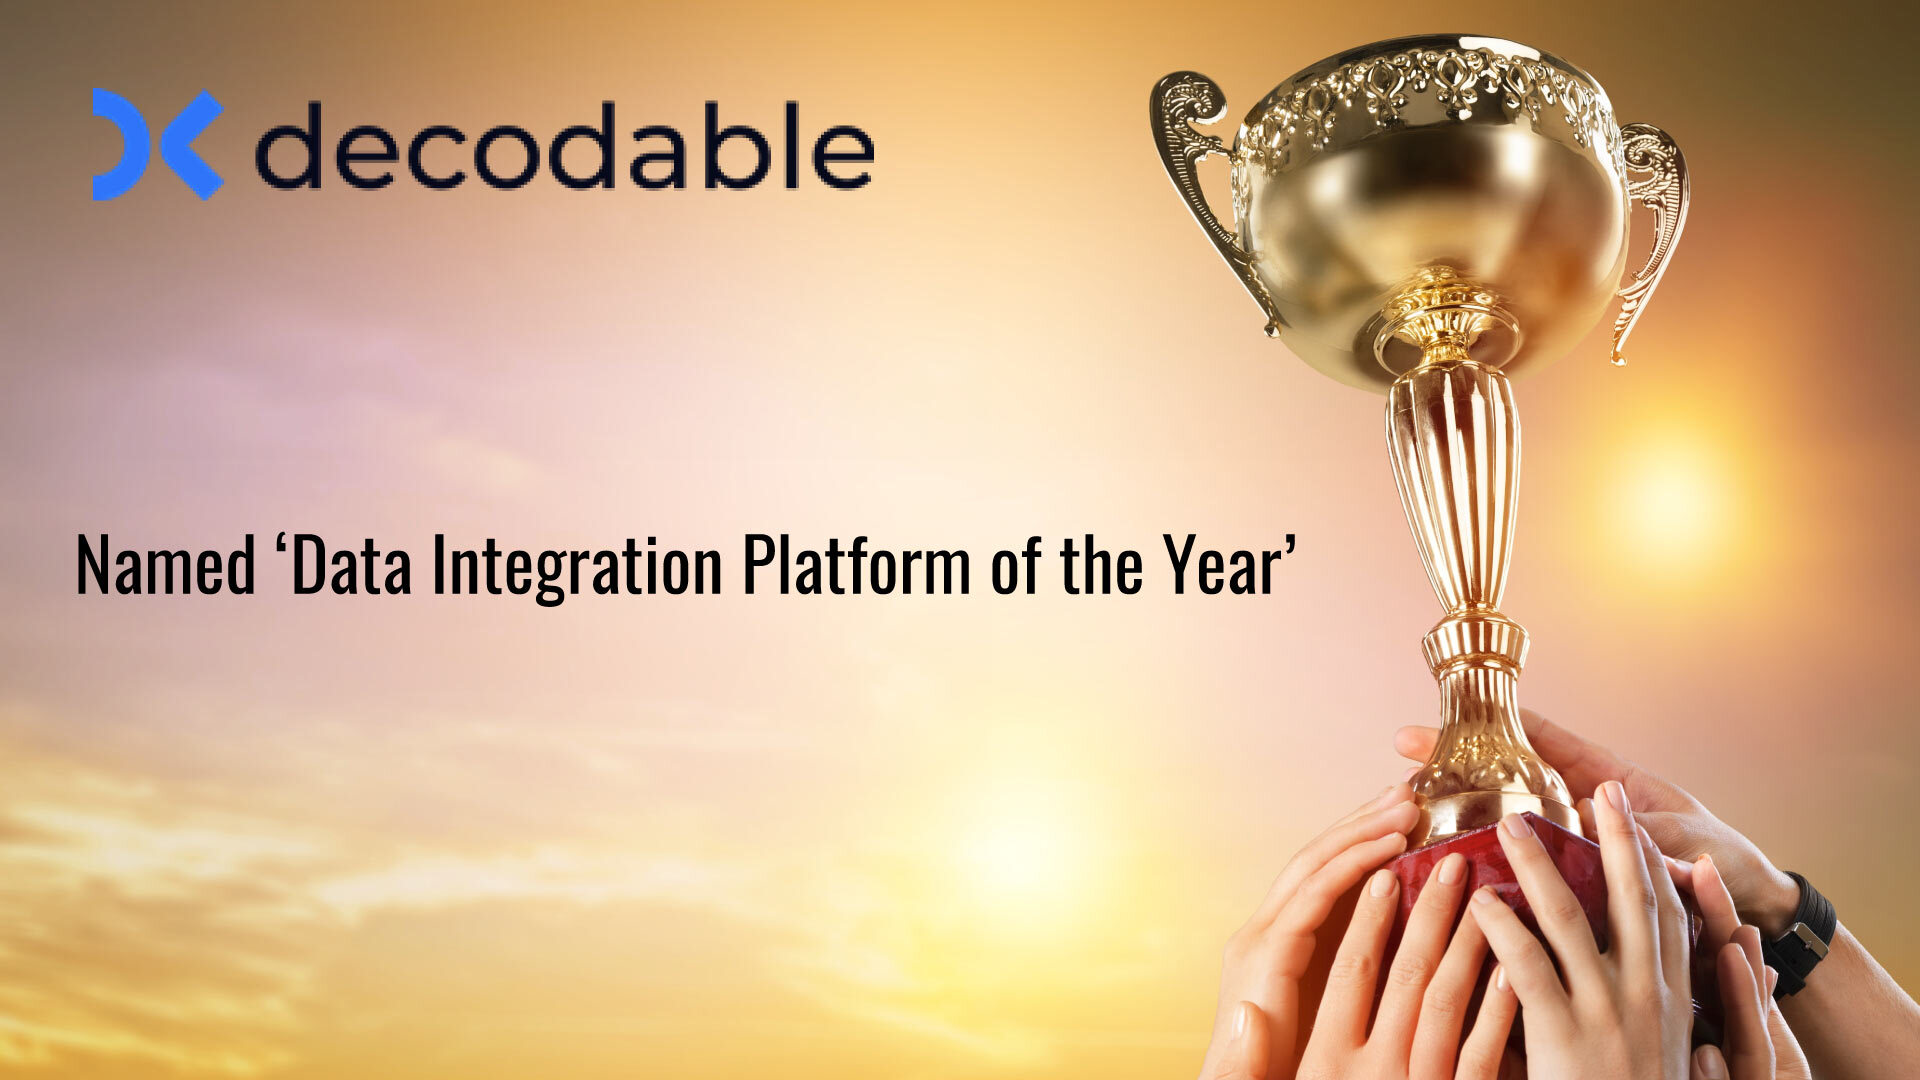 Decodable Named ‘Data Integration Platform of the Year’ in Fourth Annual Data Breakthrough Awards Program